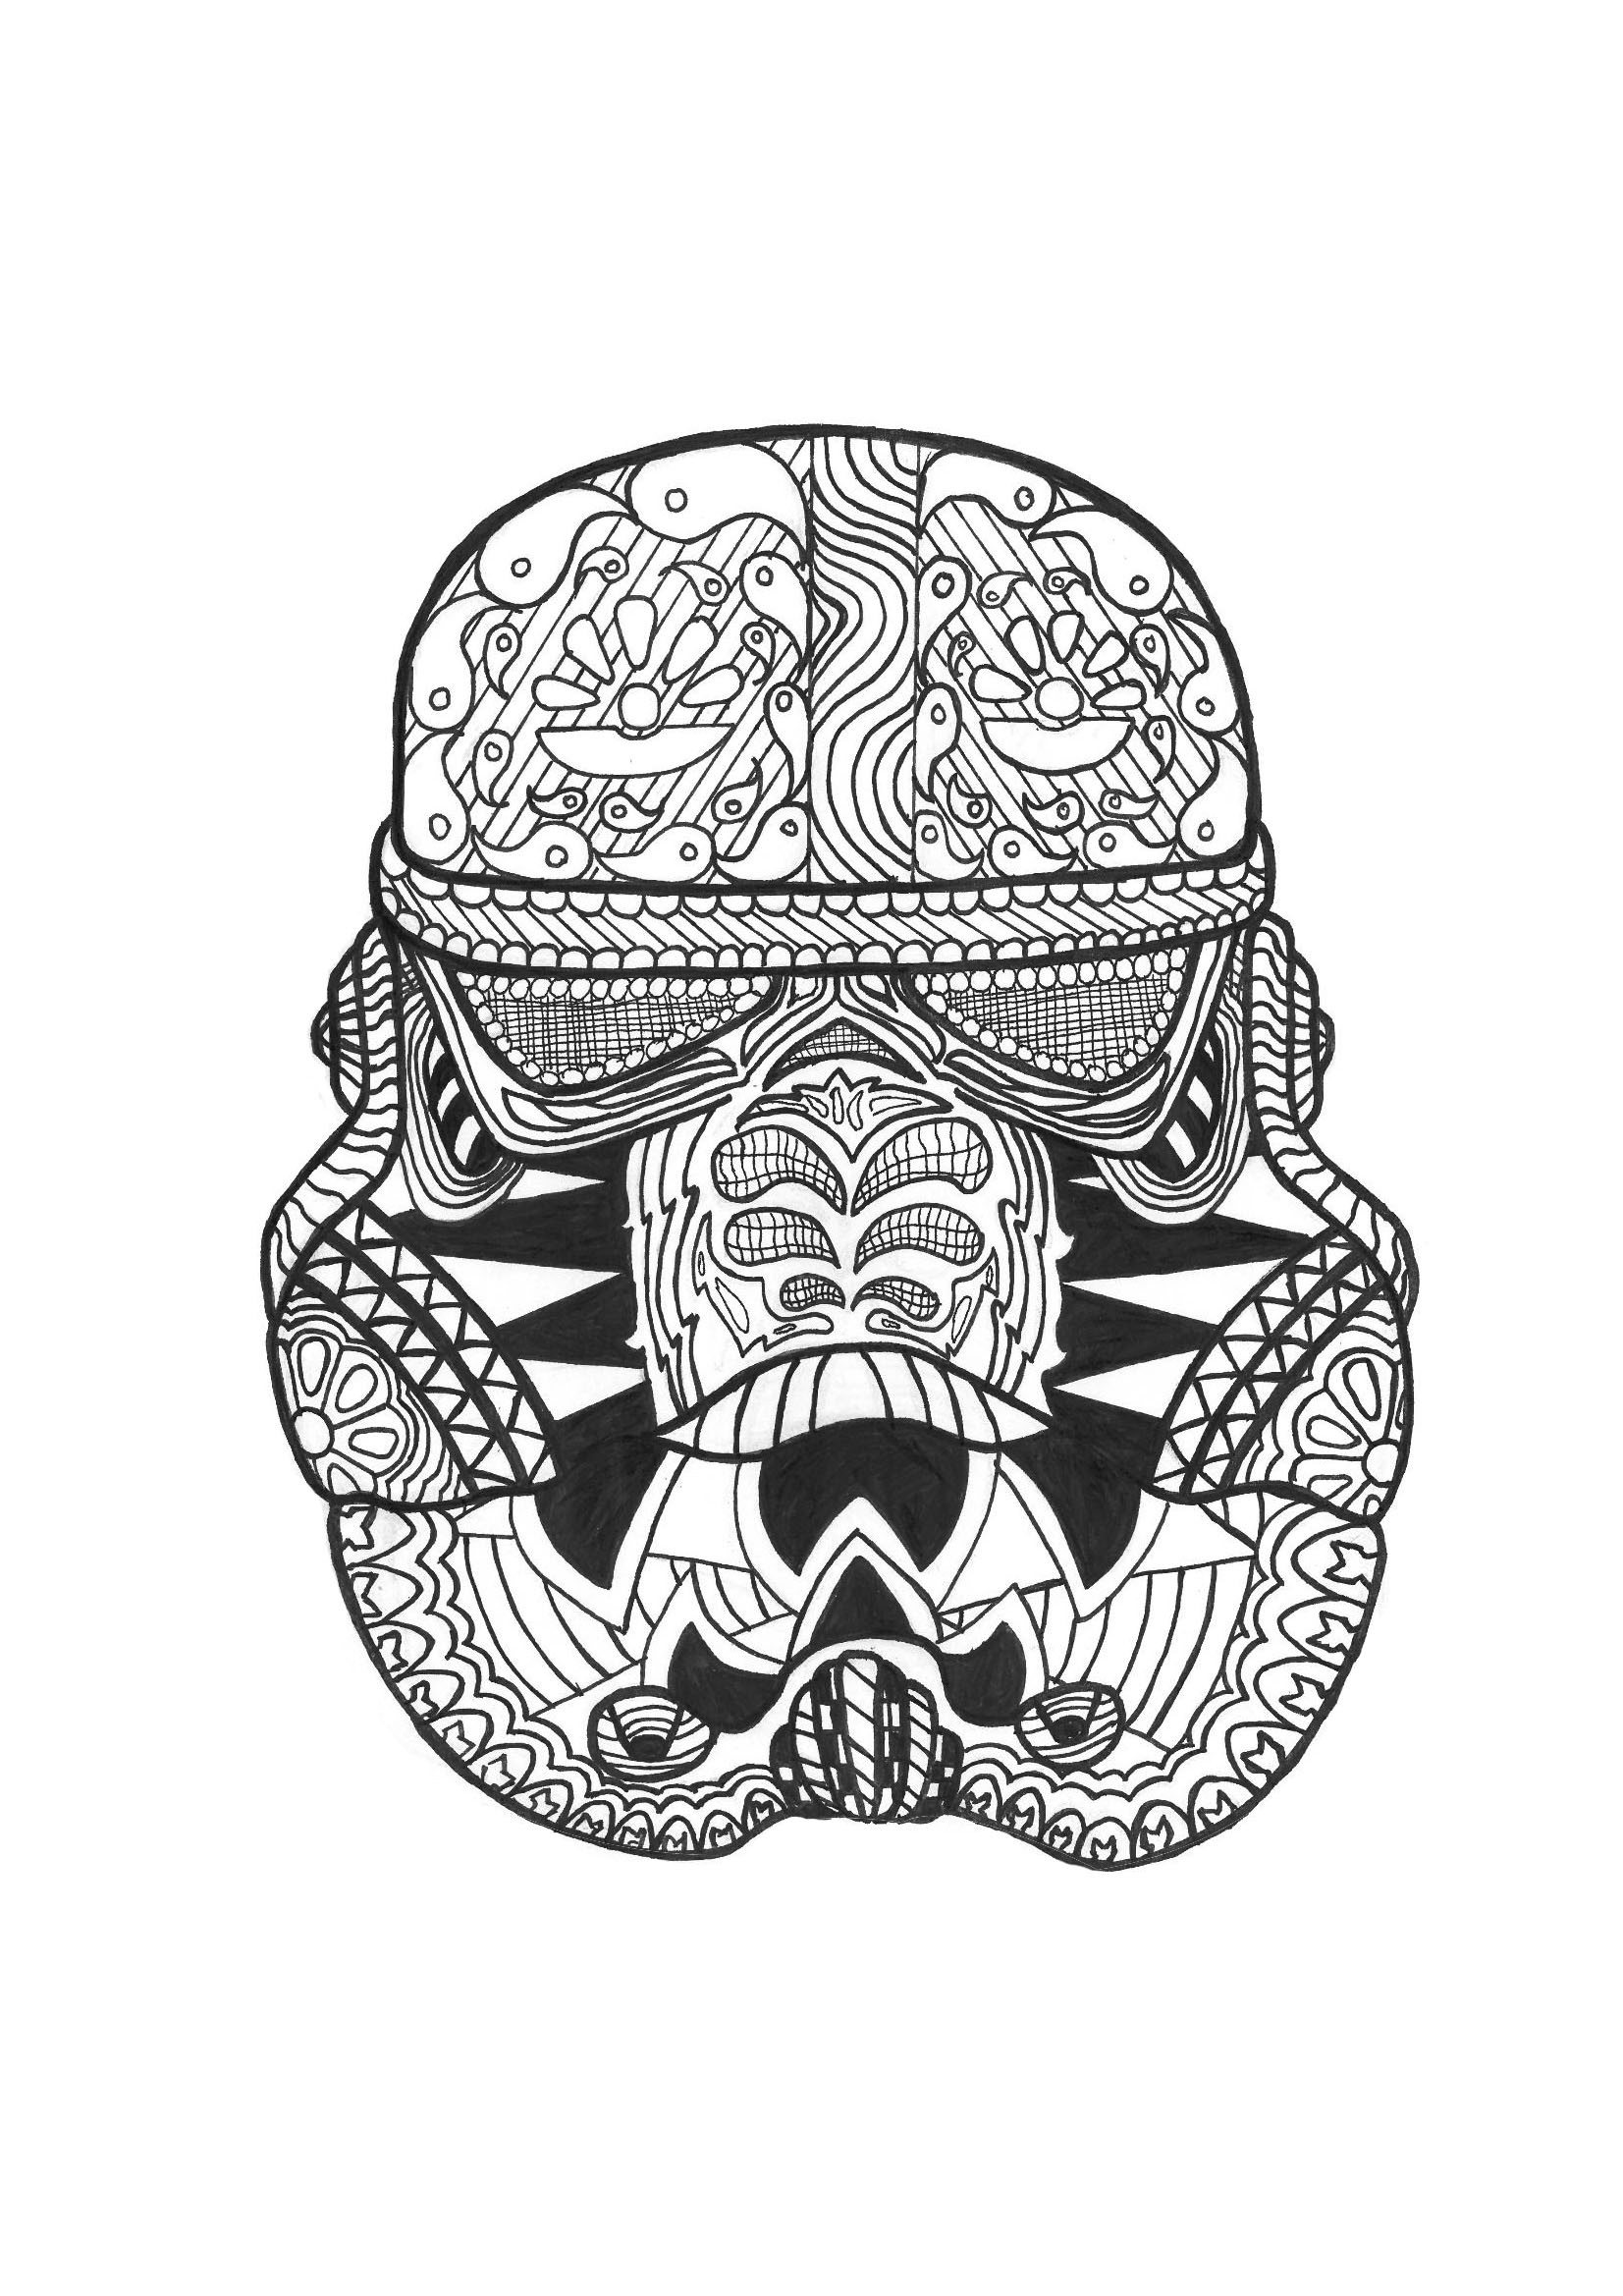 Star Wars Adult Coloring Pages
 Star wars to Star Wars Kids Coloring Pages